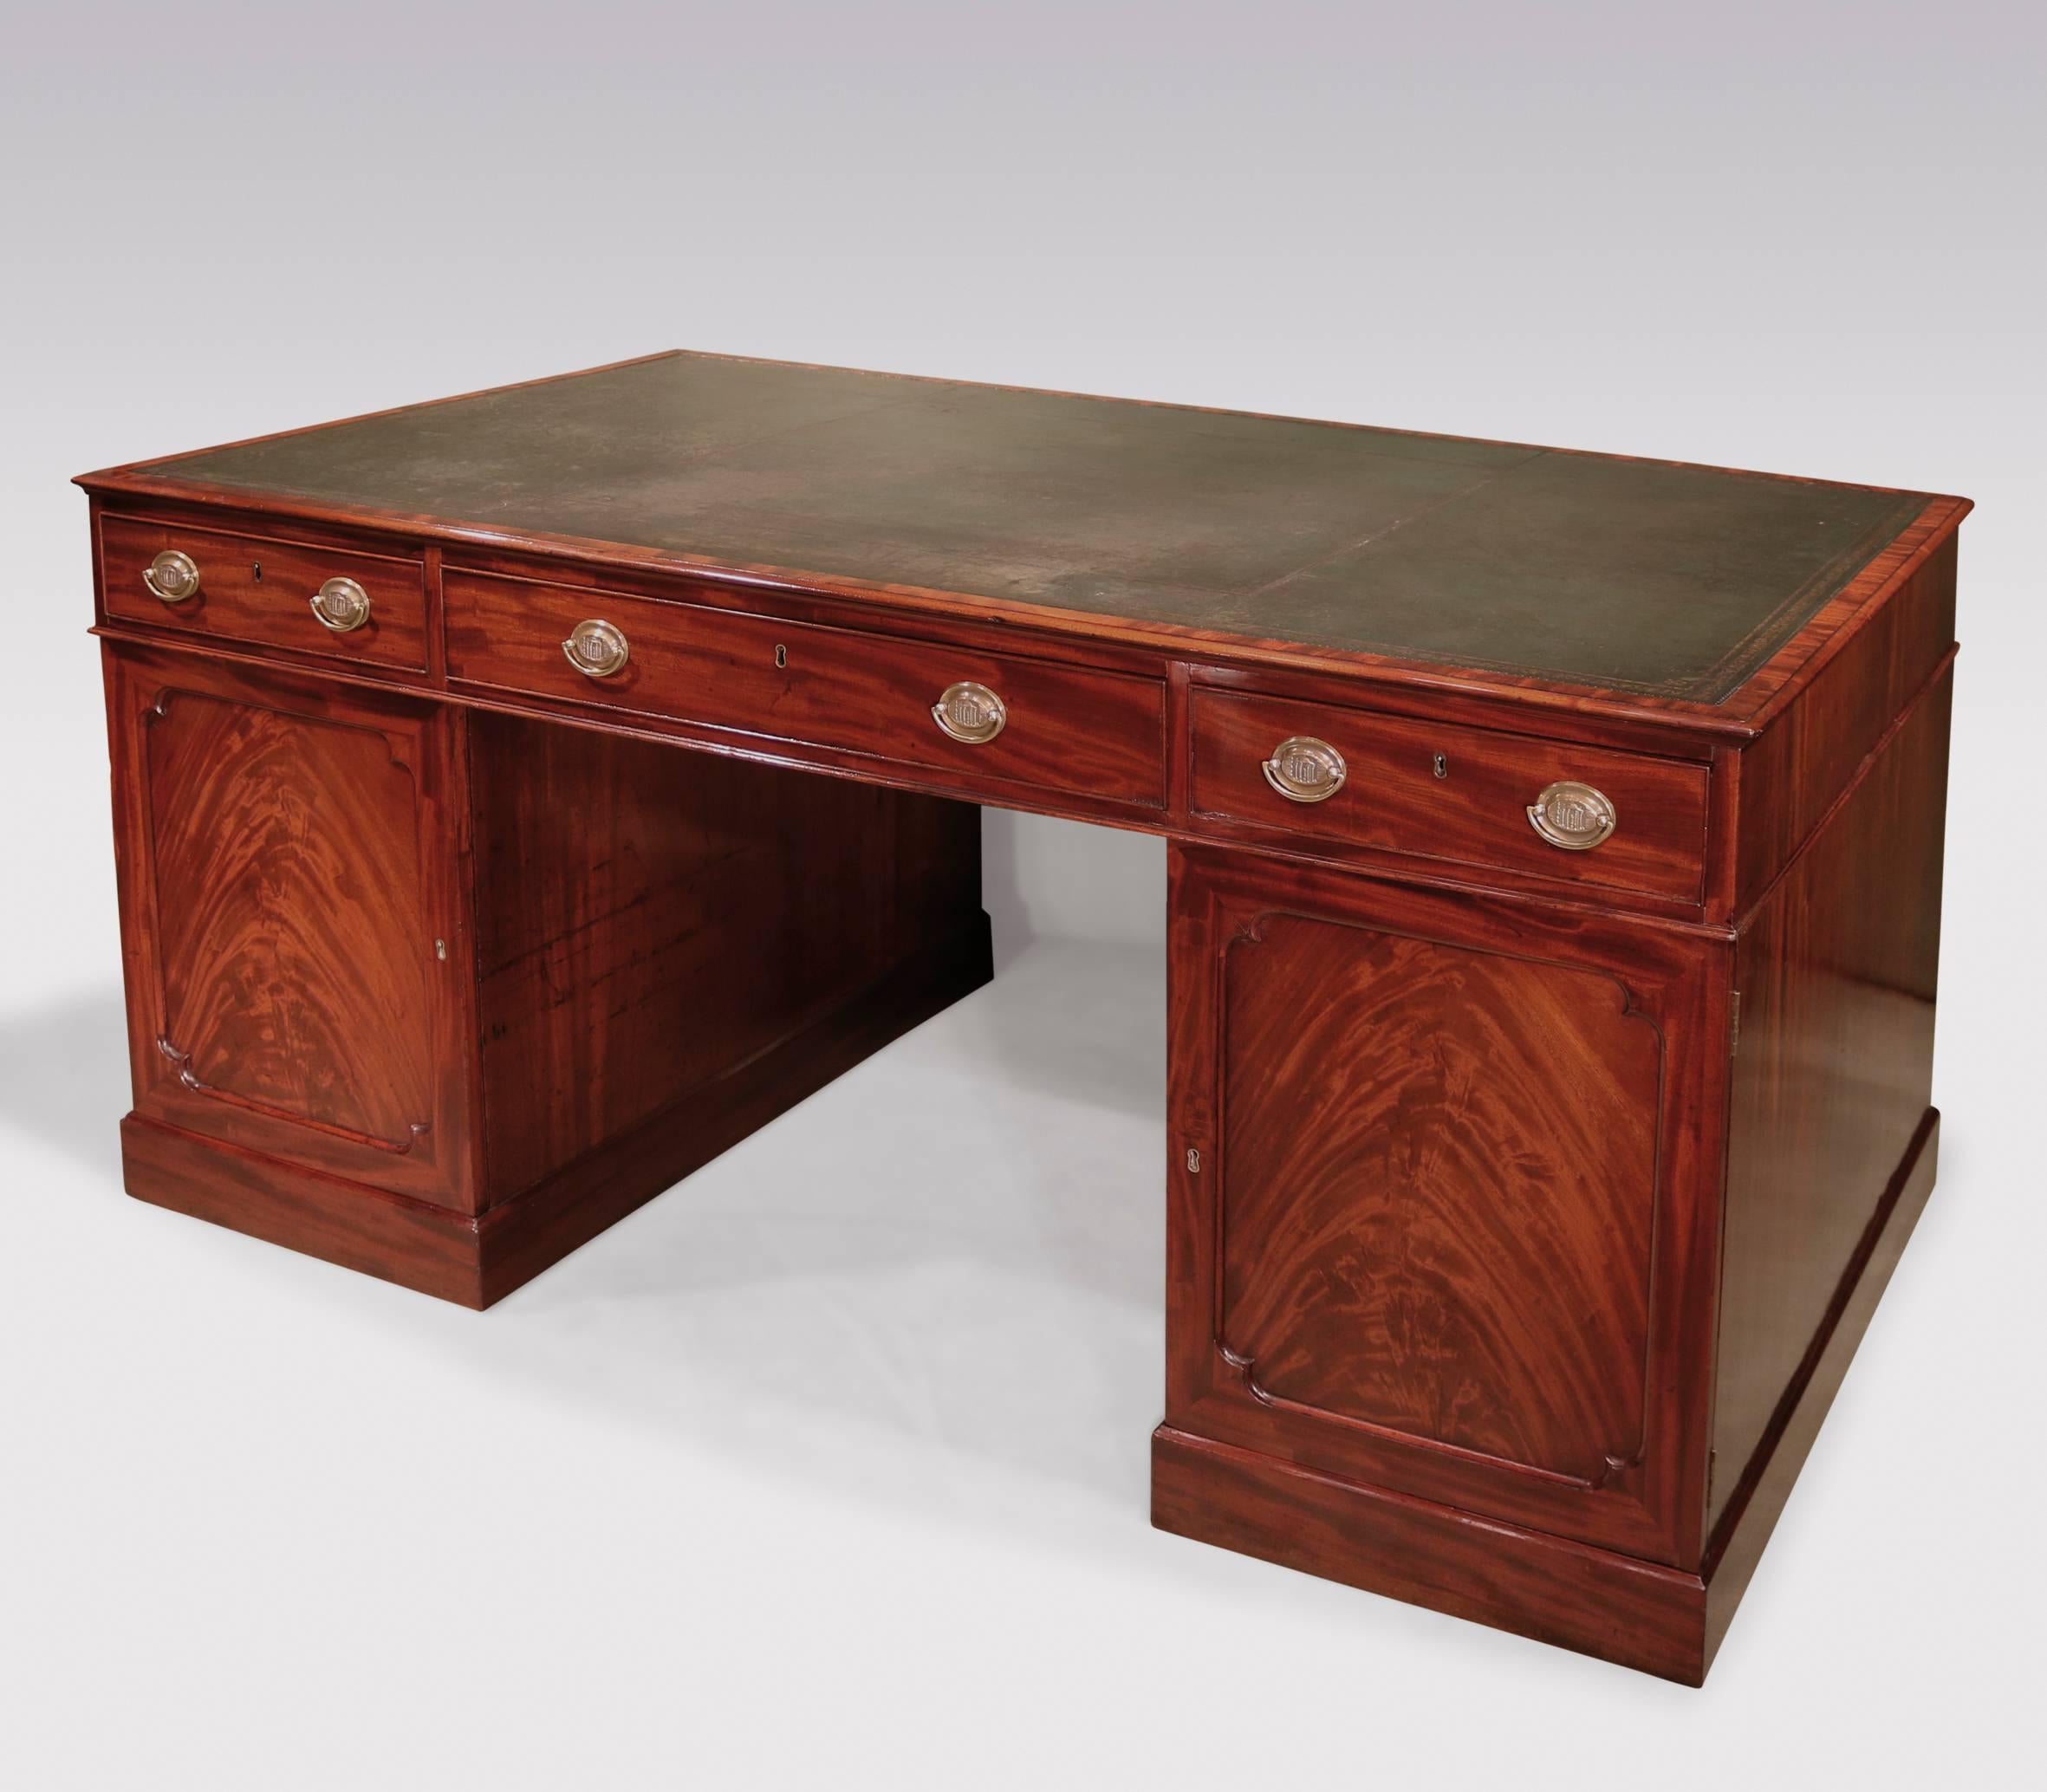 A fine late 18th century well figured mahogany library partner’s desk, having gilt tooled green leather moulded edge top, above six cockbeaded drawers. The desk, having further graduated drawers to the front and flame figured paneled cupboard doors